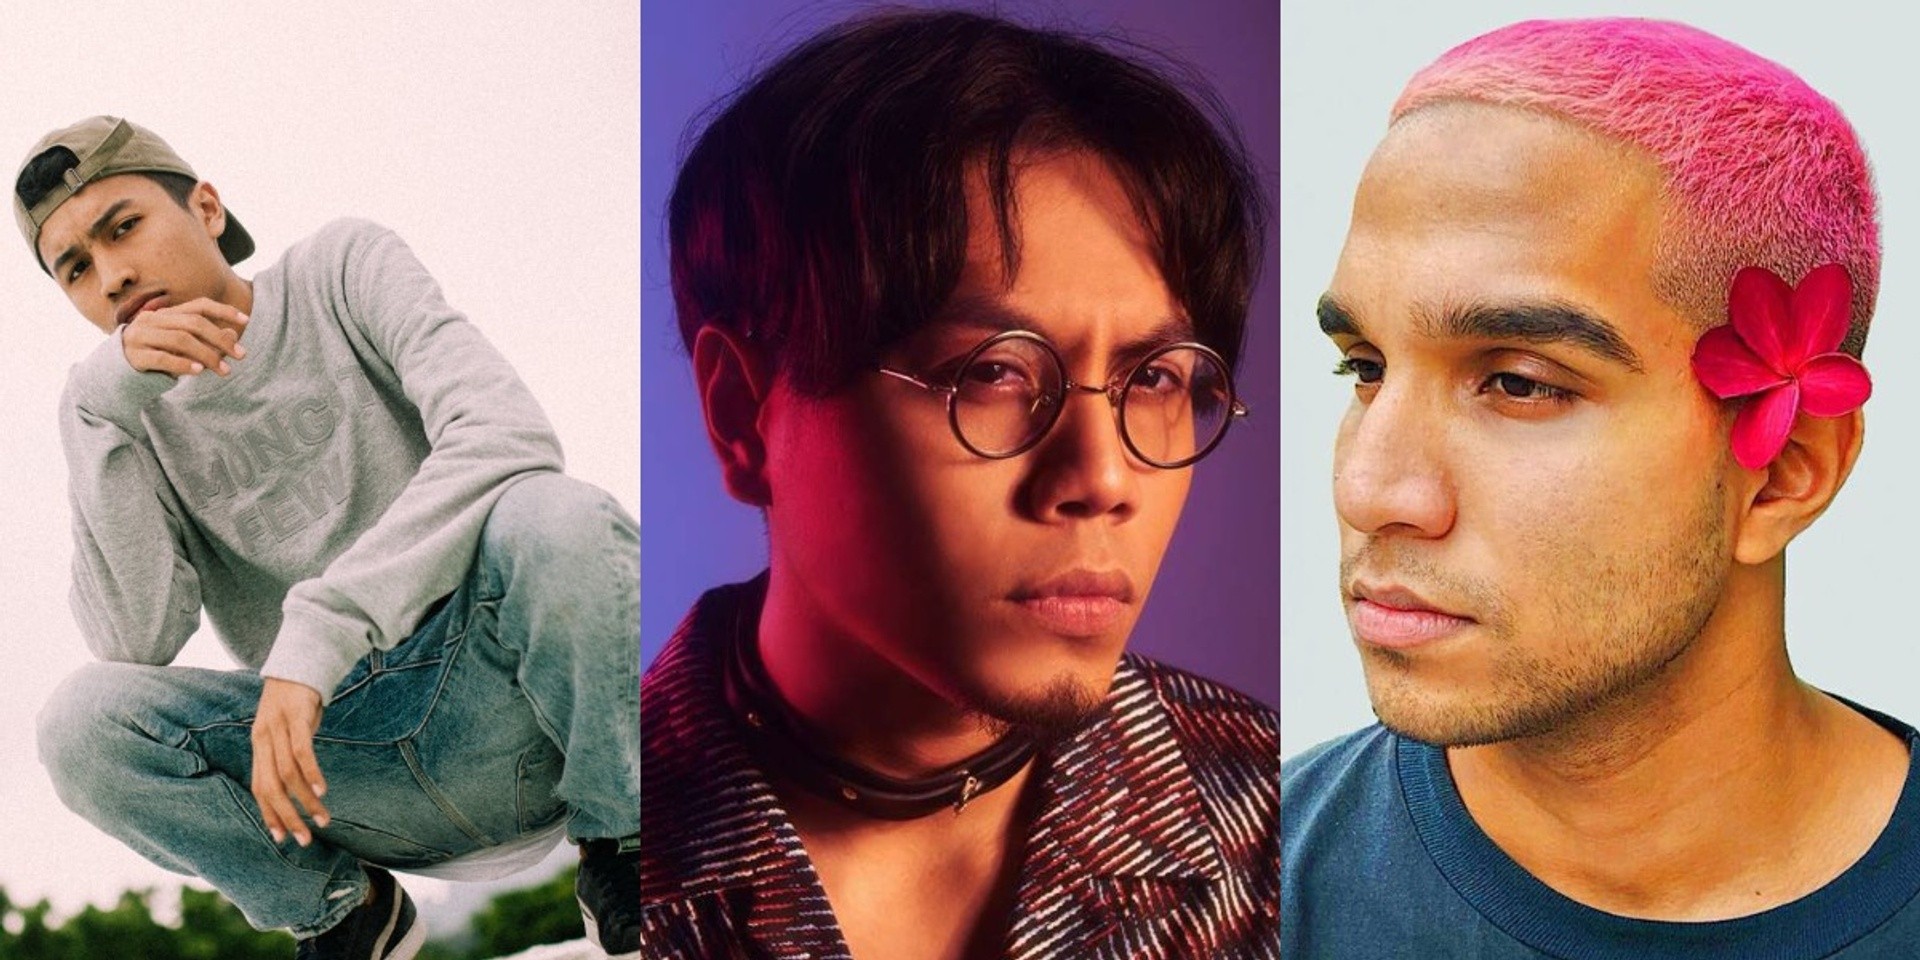 Fariz Jabba, Yung Raja, Mean and more to perform at G-SHOCK's Origins: Transmission party 